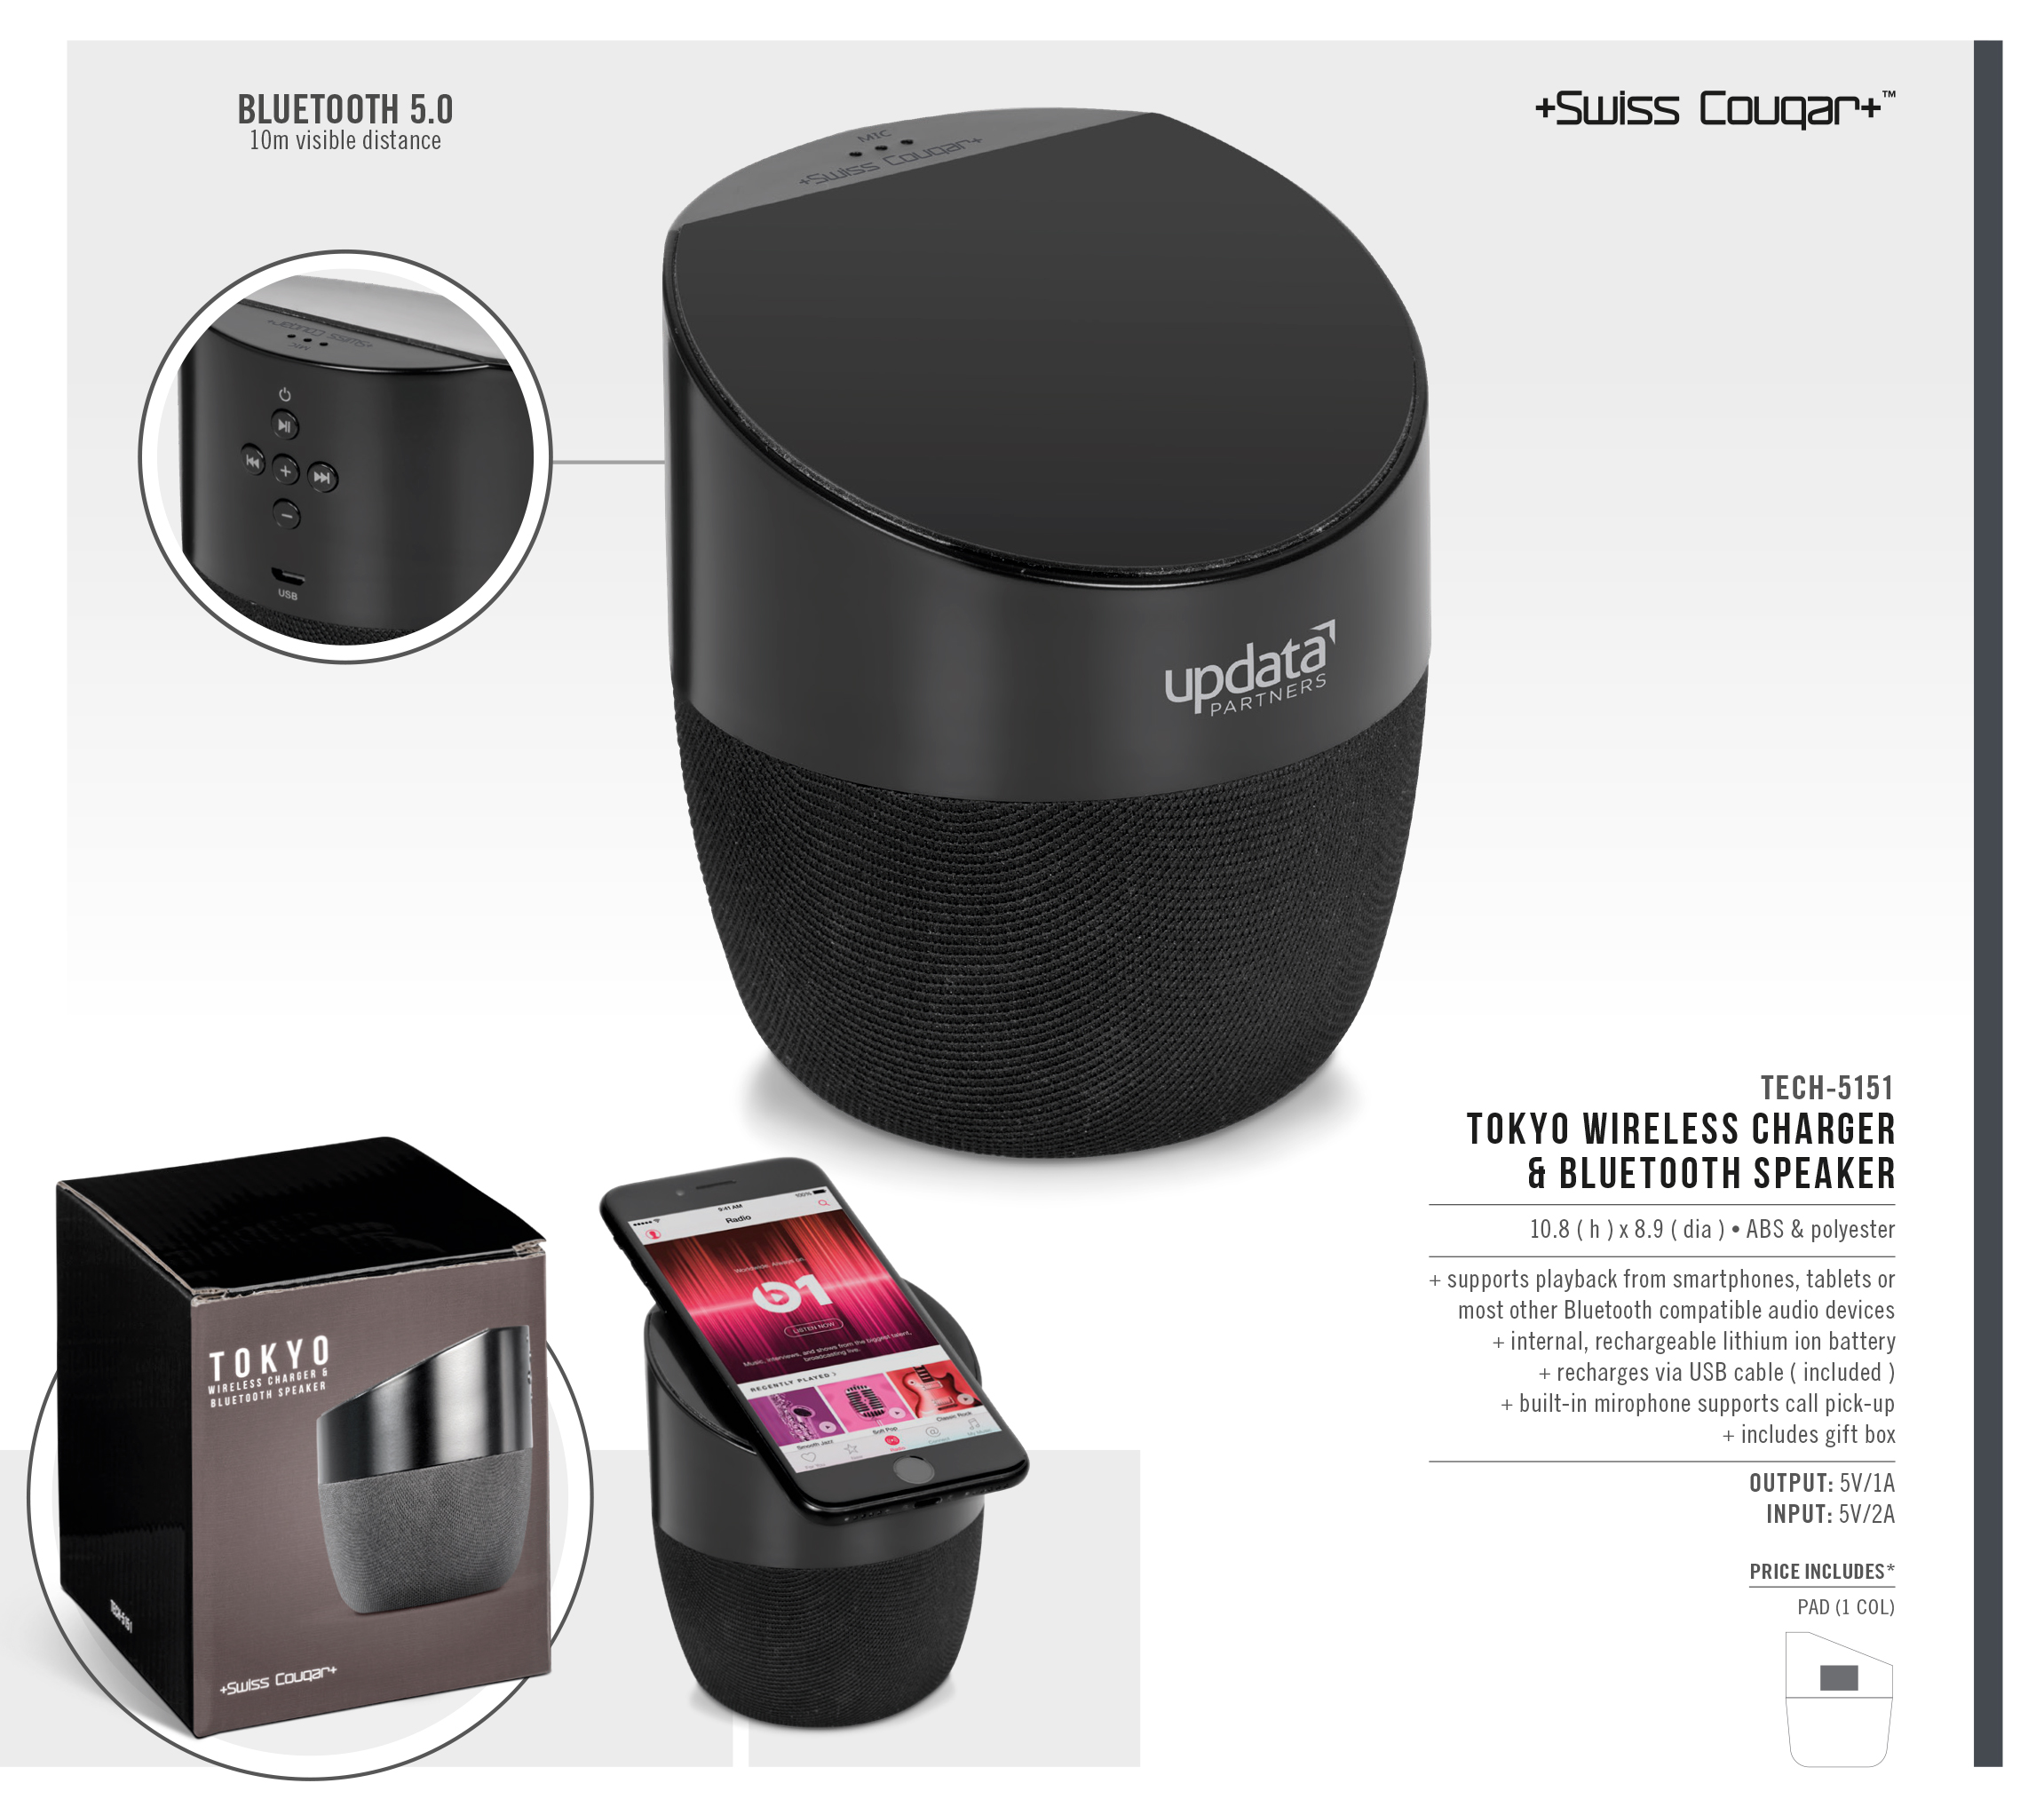 TECH-5151 - Swiss Cougar Tokyo Wireless Charger & Bluetooth Speaker - Catalogue Image